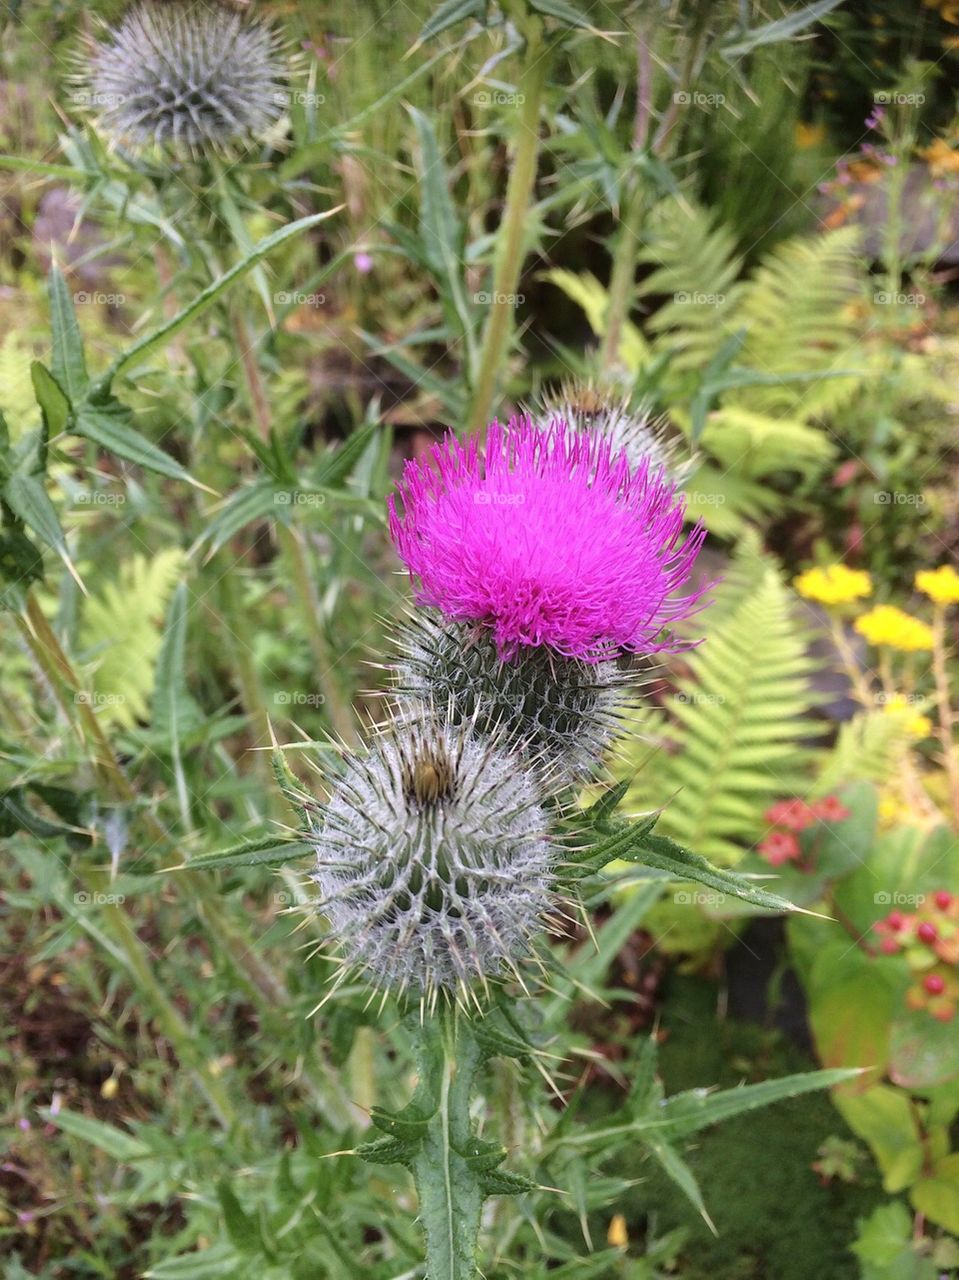 Thistle blooming in a Scottish garden, spiky to touch but vibrant and beautiful.